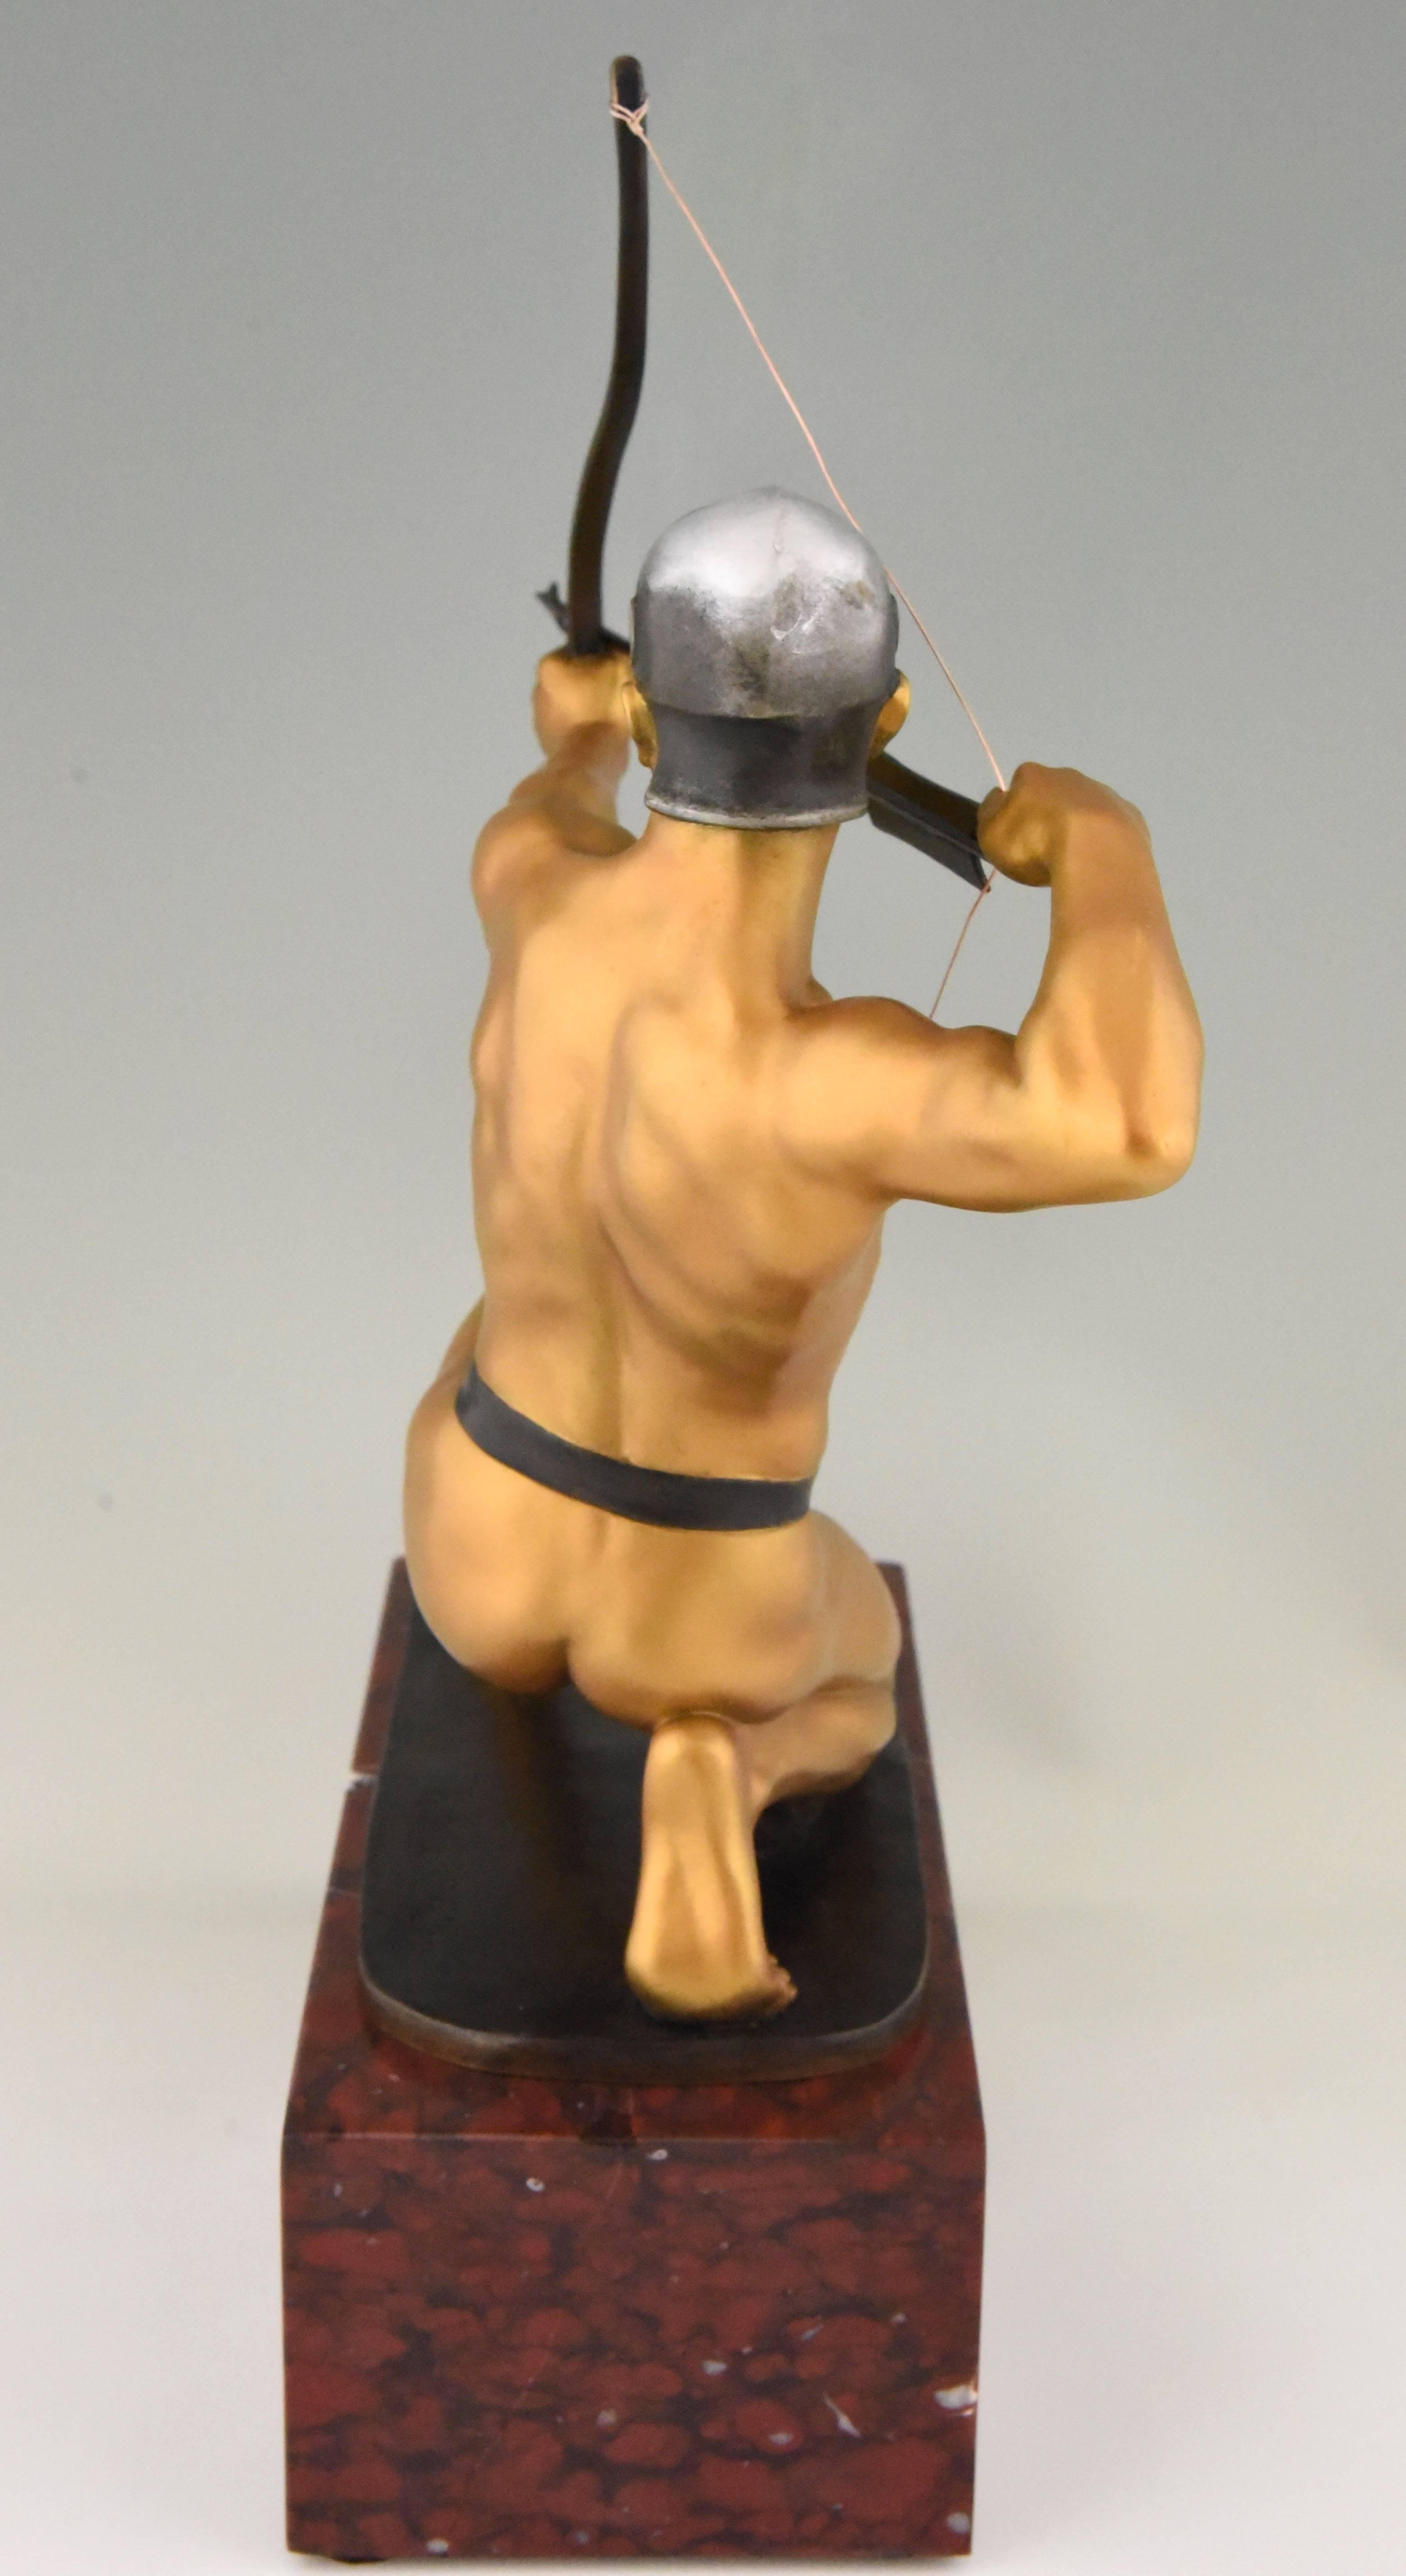 Marble Antique Bronze Sculpture of a Male Nude Archer by Rudolf Kaesbach  1900